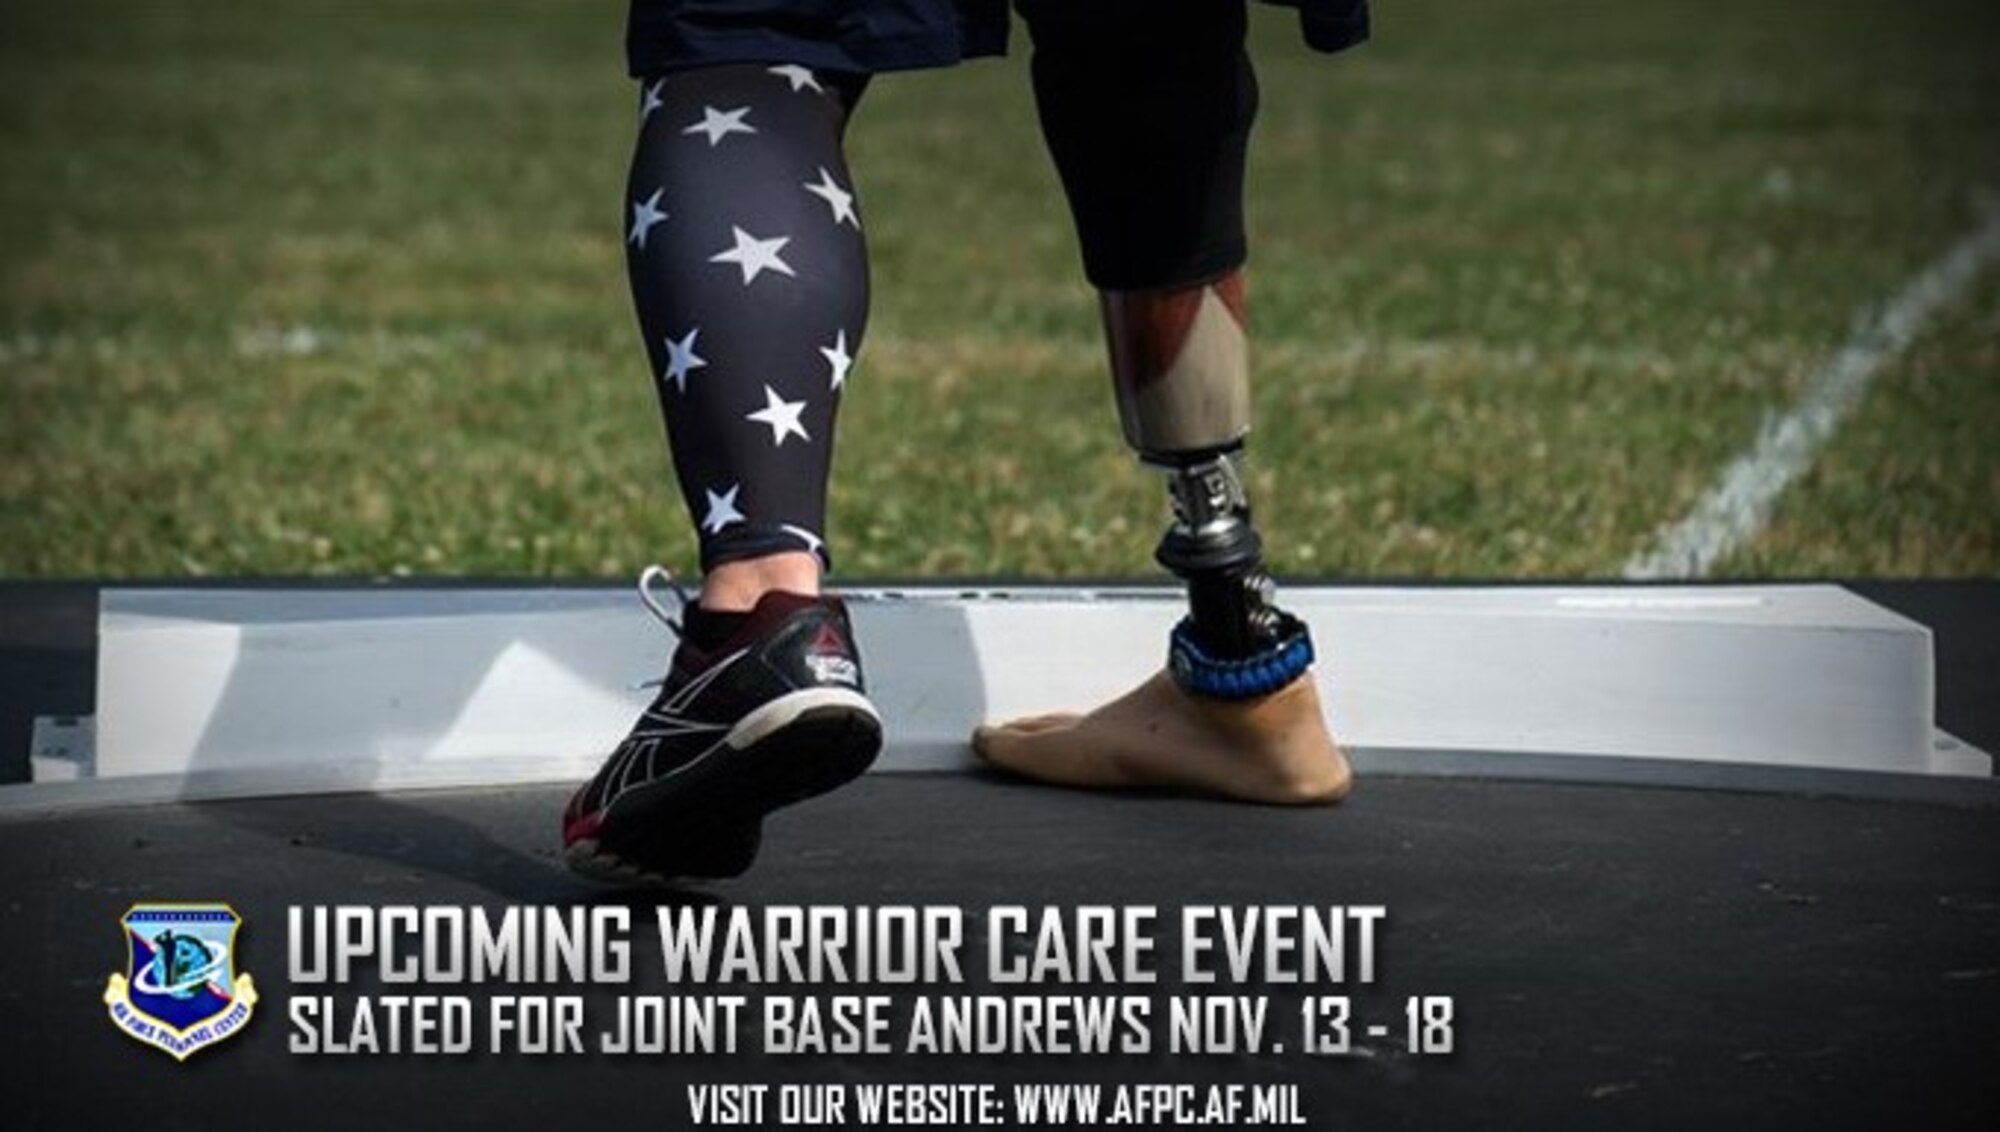 The Air Force Wounded Warrior program is hosting a Warrior CARE event at Joint Base Andrews, District of Washington, in November. AFW2 provides personalized service, support and advocacy for the needs of seriously wounded, ill and injured Airmen. (U.S. Air Force courtesy photo)